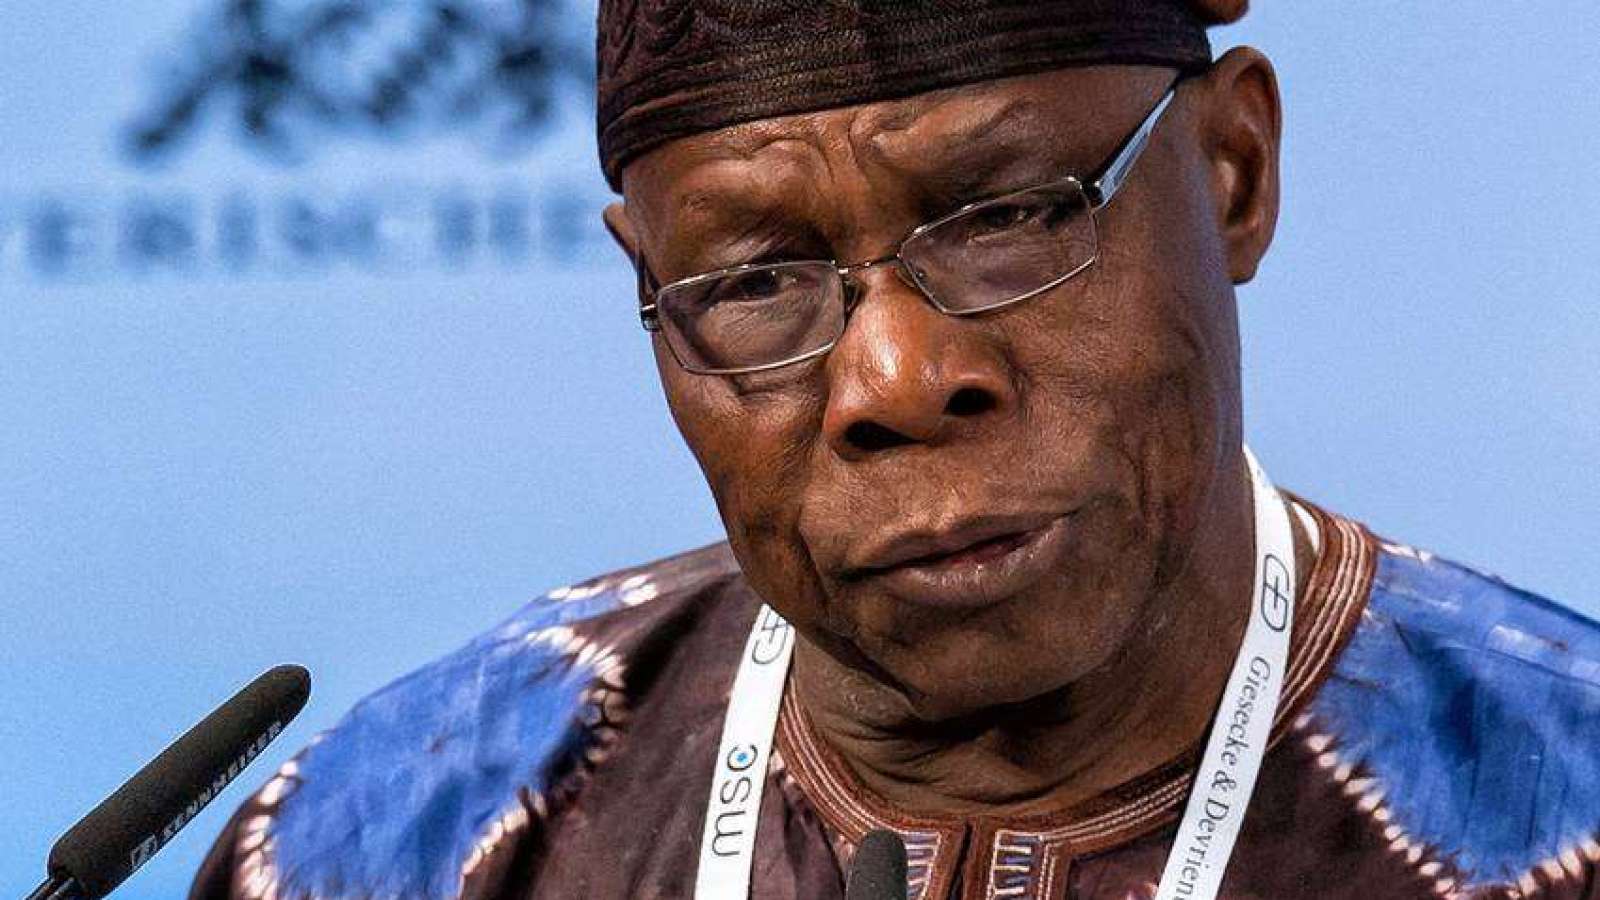 OBJ @ 85: AGE WITH GRACE, A FATHER FIGURE AND A NATIONALIST